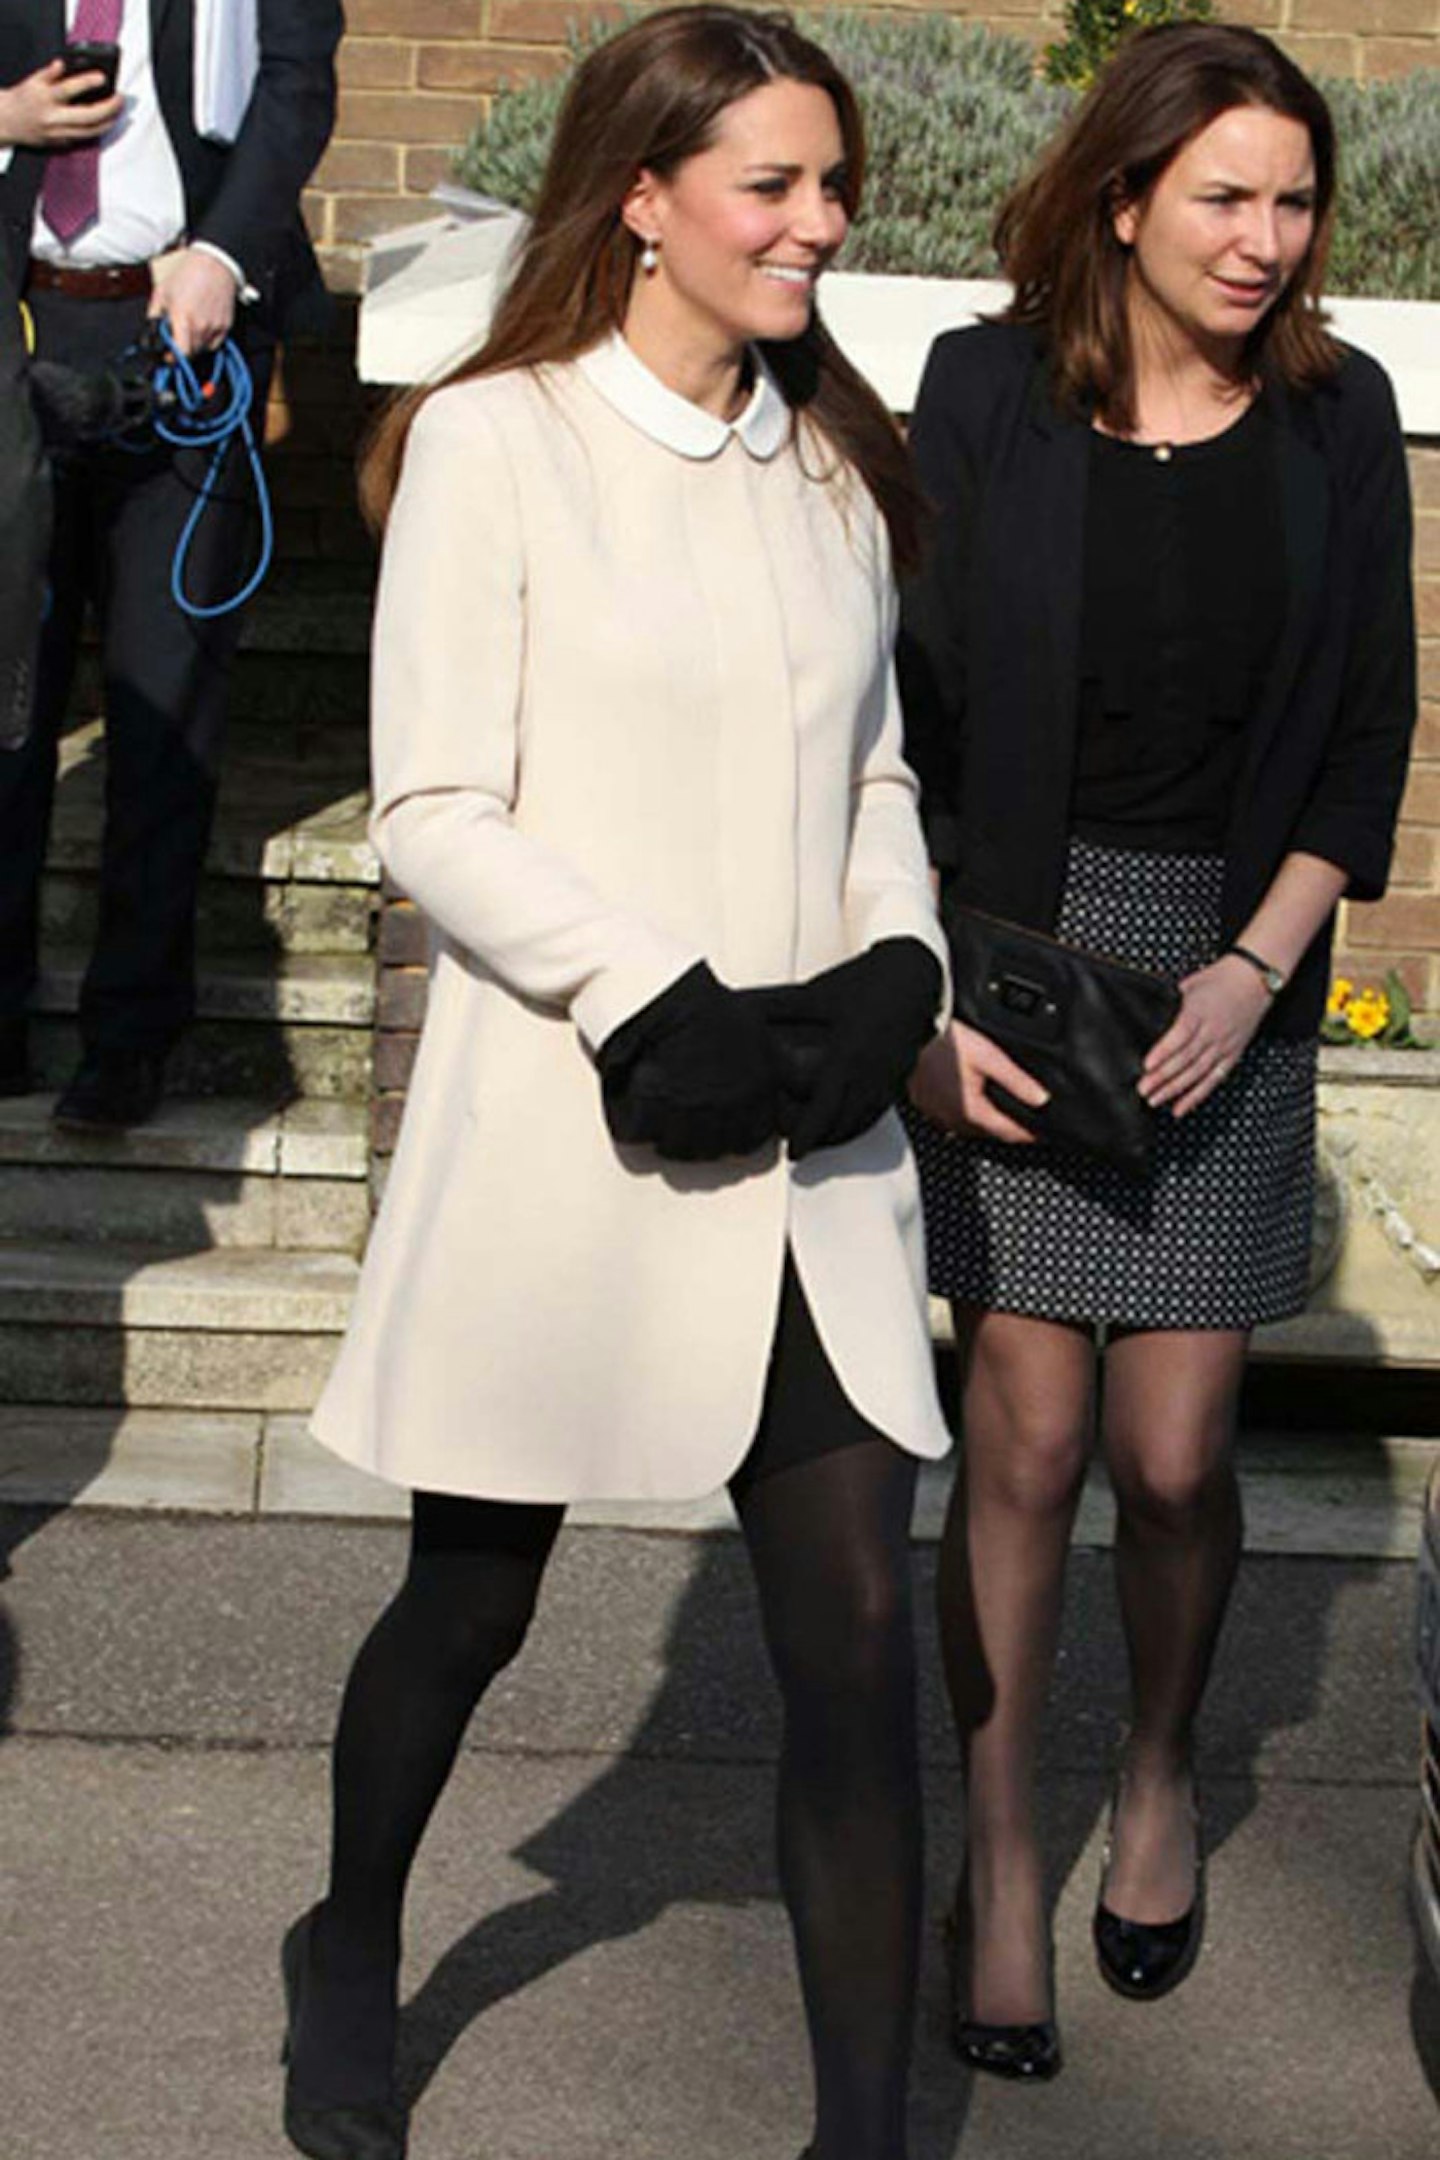 Kate Middleton wears Topshop 'Contrast Collar Dress' And Goat 'Redgrave' Coat, Child Bereavement UK HQ, 19 March 2013